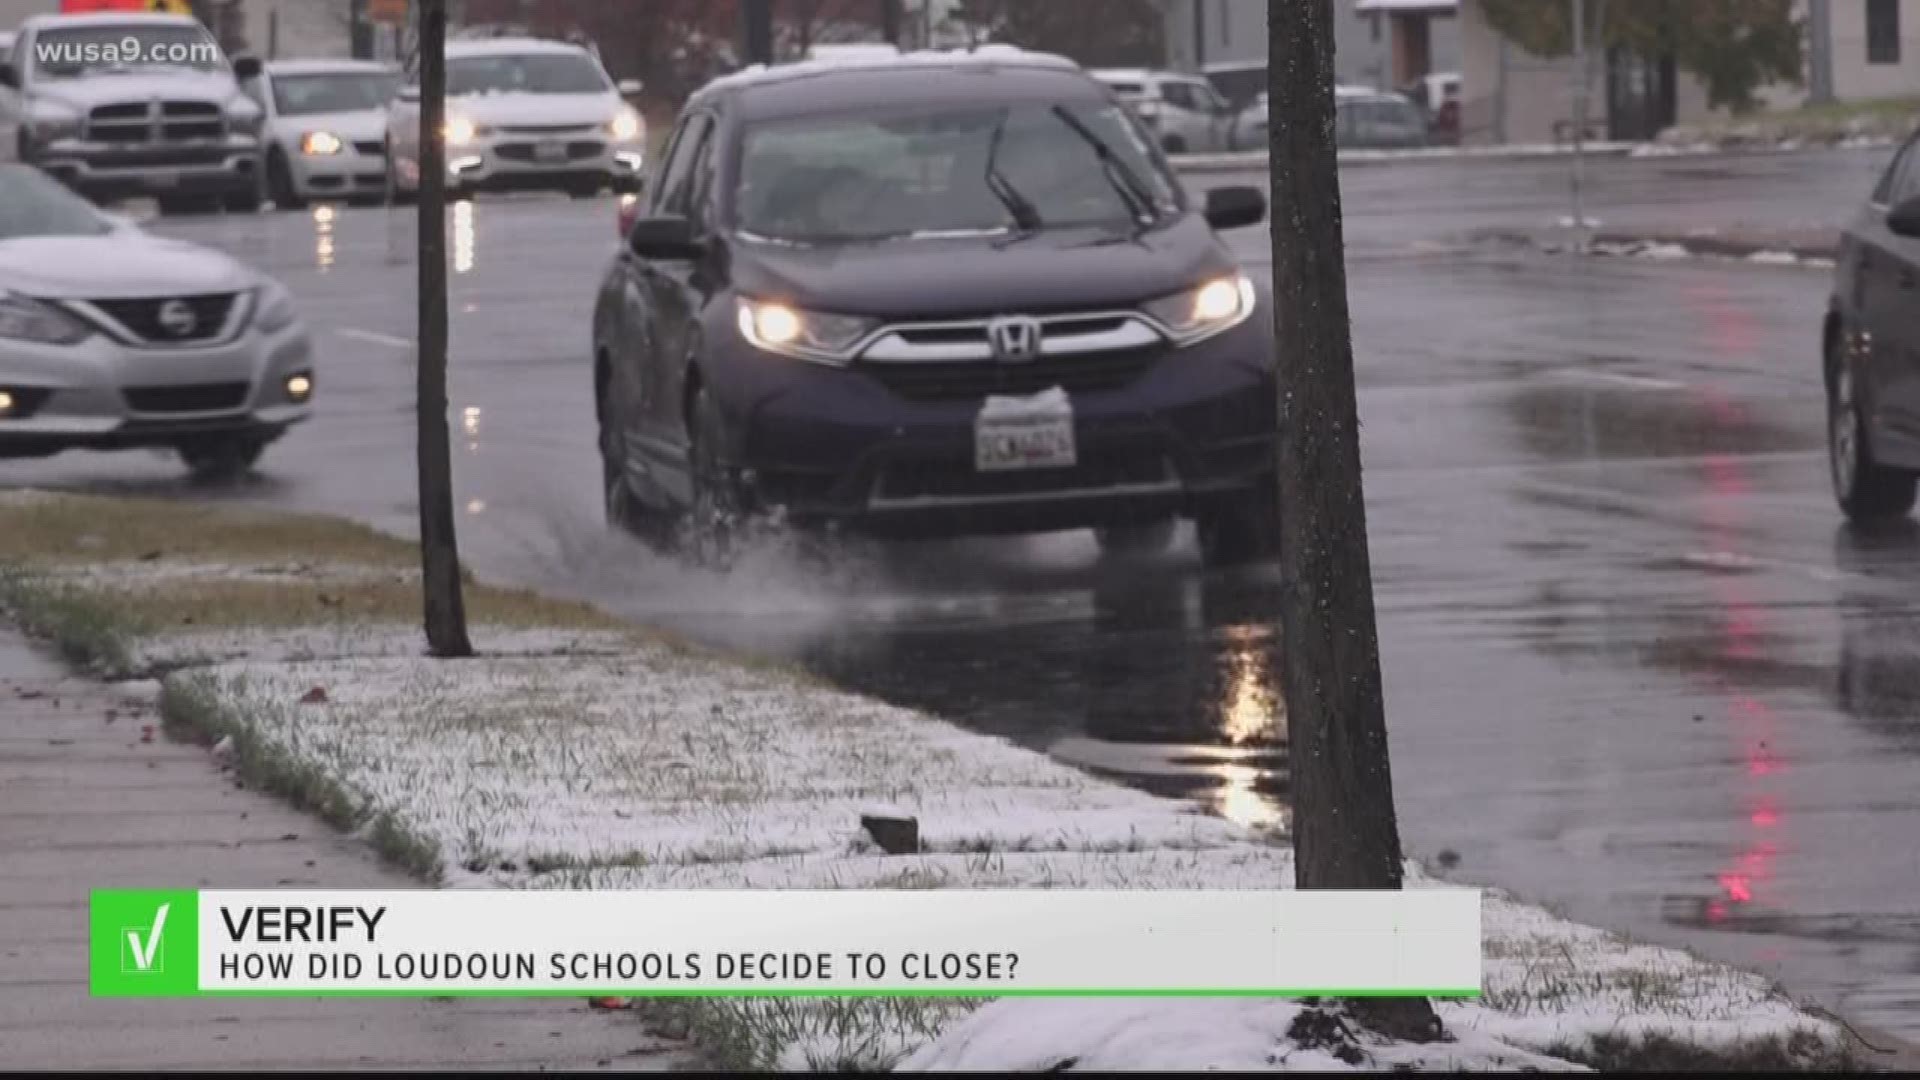 With the weather threat, the Loudoun County Public Schools weather team monitored the reported conditions in the area.